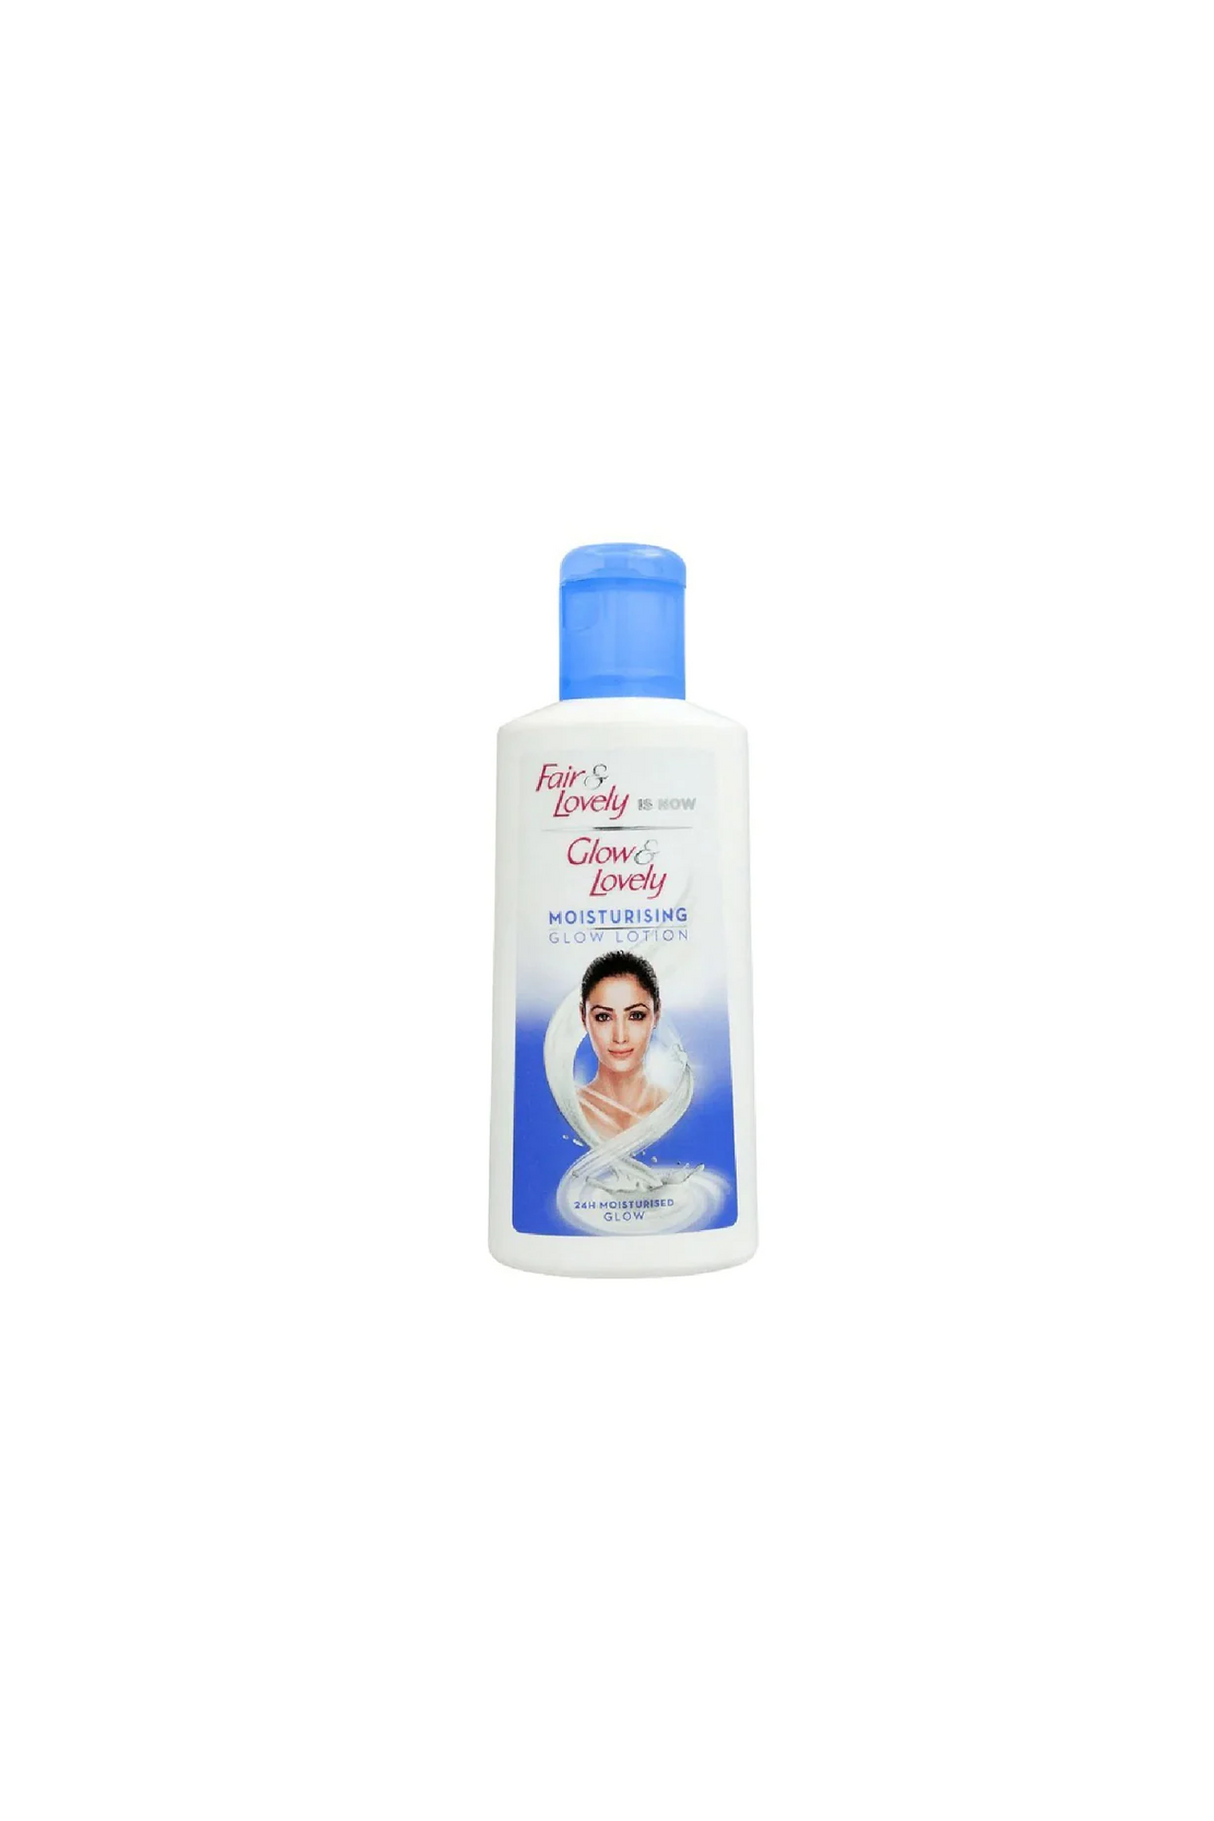 glow & lovely fairness lotion 200ml